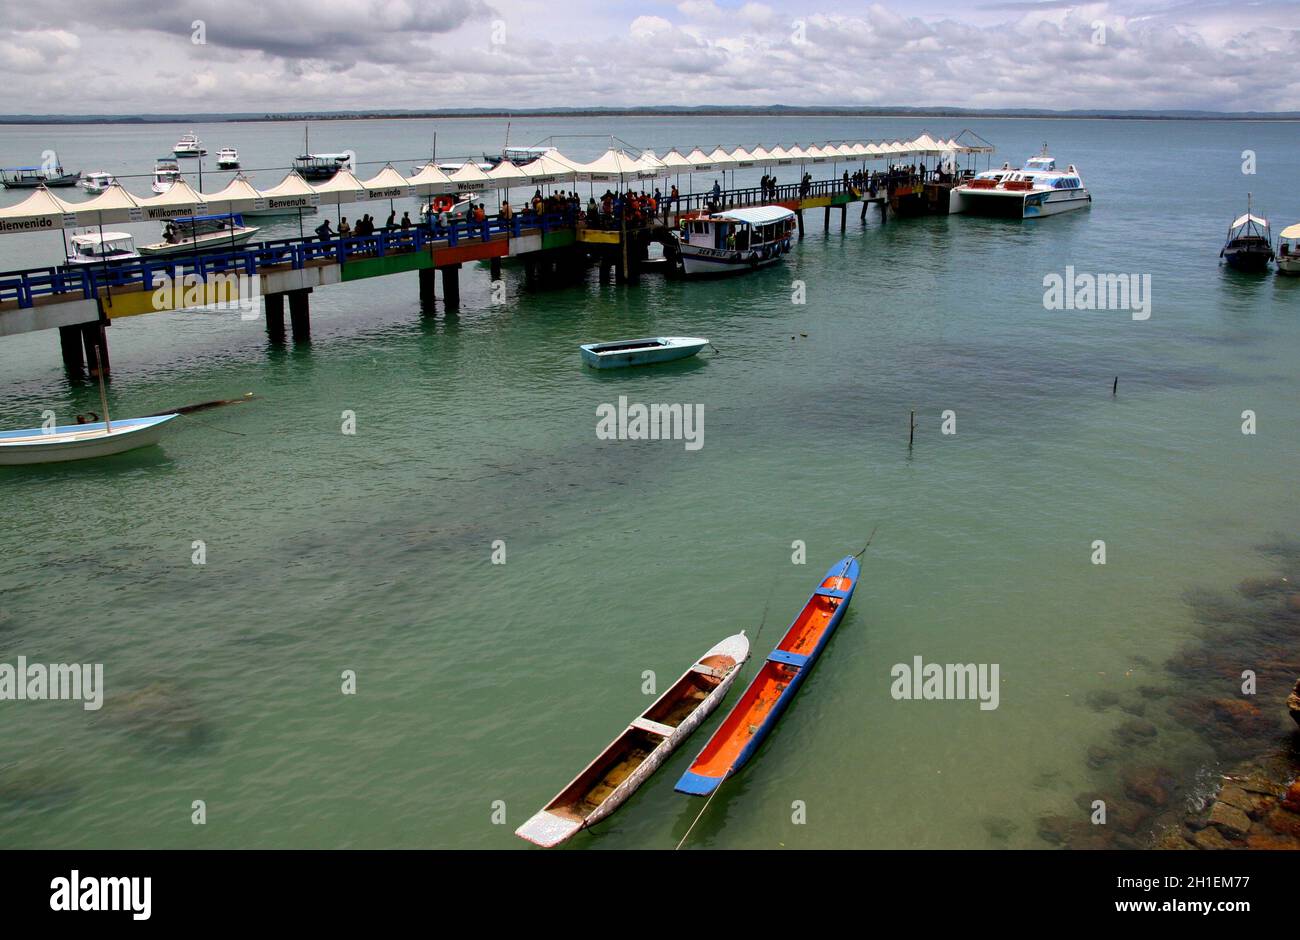 cairu, bahia / brazil - november 18, 2007: tourists are seen during embarkation and disembarkation at the port of the island of Morro de Sao Paulo, in Stock Photo